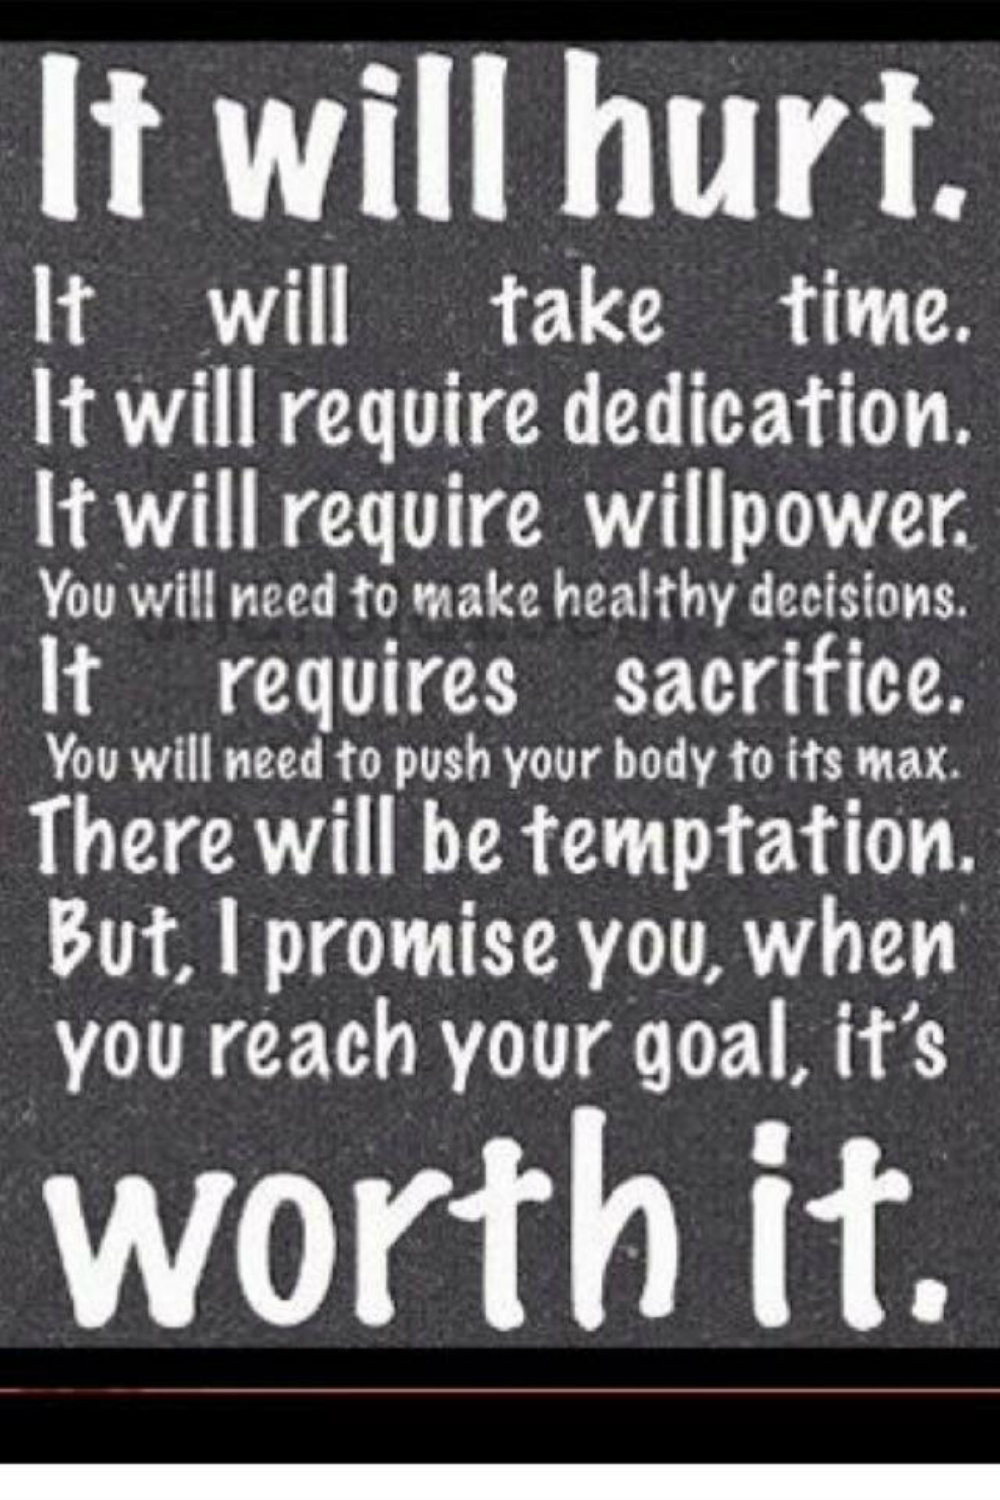 Inspirational Weight Loss Quotes Pictures
 Weight Loss Motivational Quotes QuotesGram